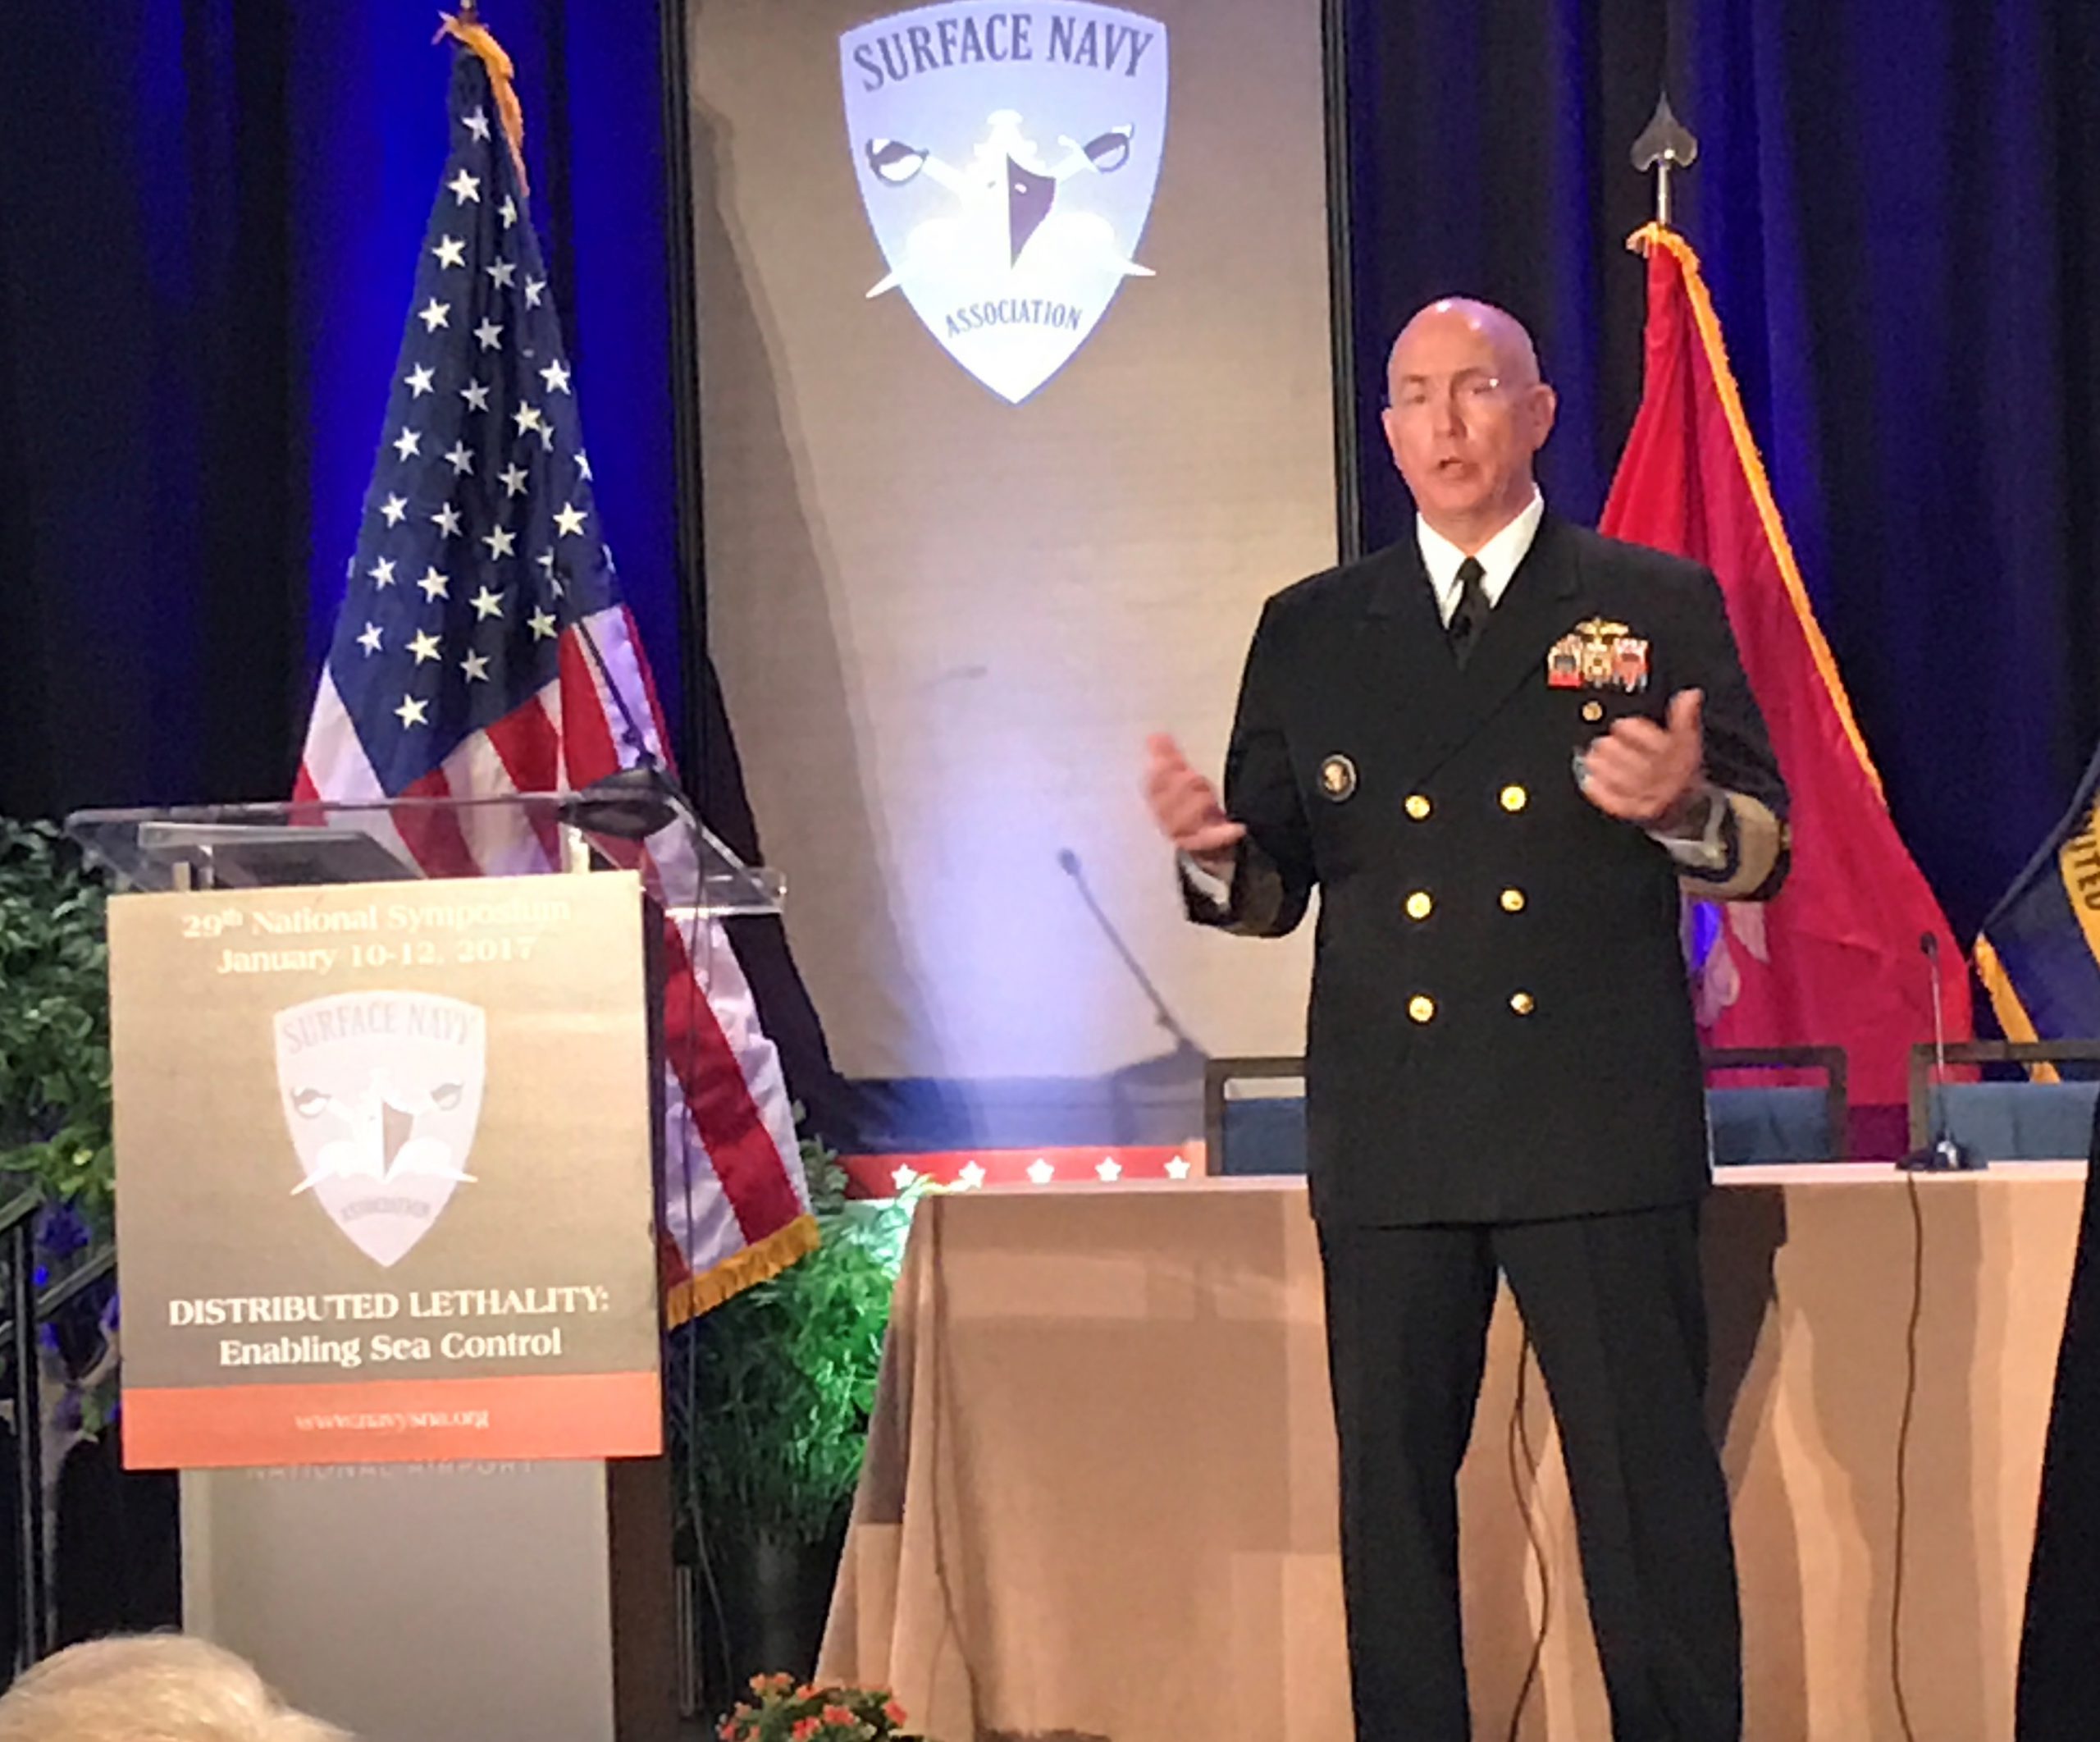 Navy Adm. Kurt W. Tidd, commander of U.S. Southern Command, discusses the virtues of sea power in his keynote address at the Surface Navy Association’s 29th National Symposium in Washington, D.C., Jan. 12, 2017. The Jan. 10-12 symposium featured a number of speakers encouraging dialogue and sharing innovations in the surface warfare community. DoD photo by Amaani Lyle. -